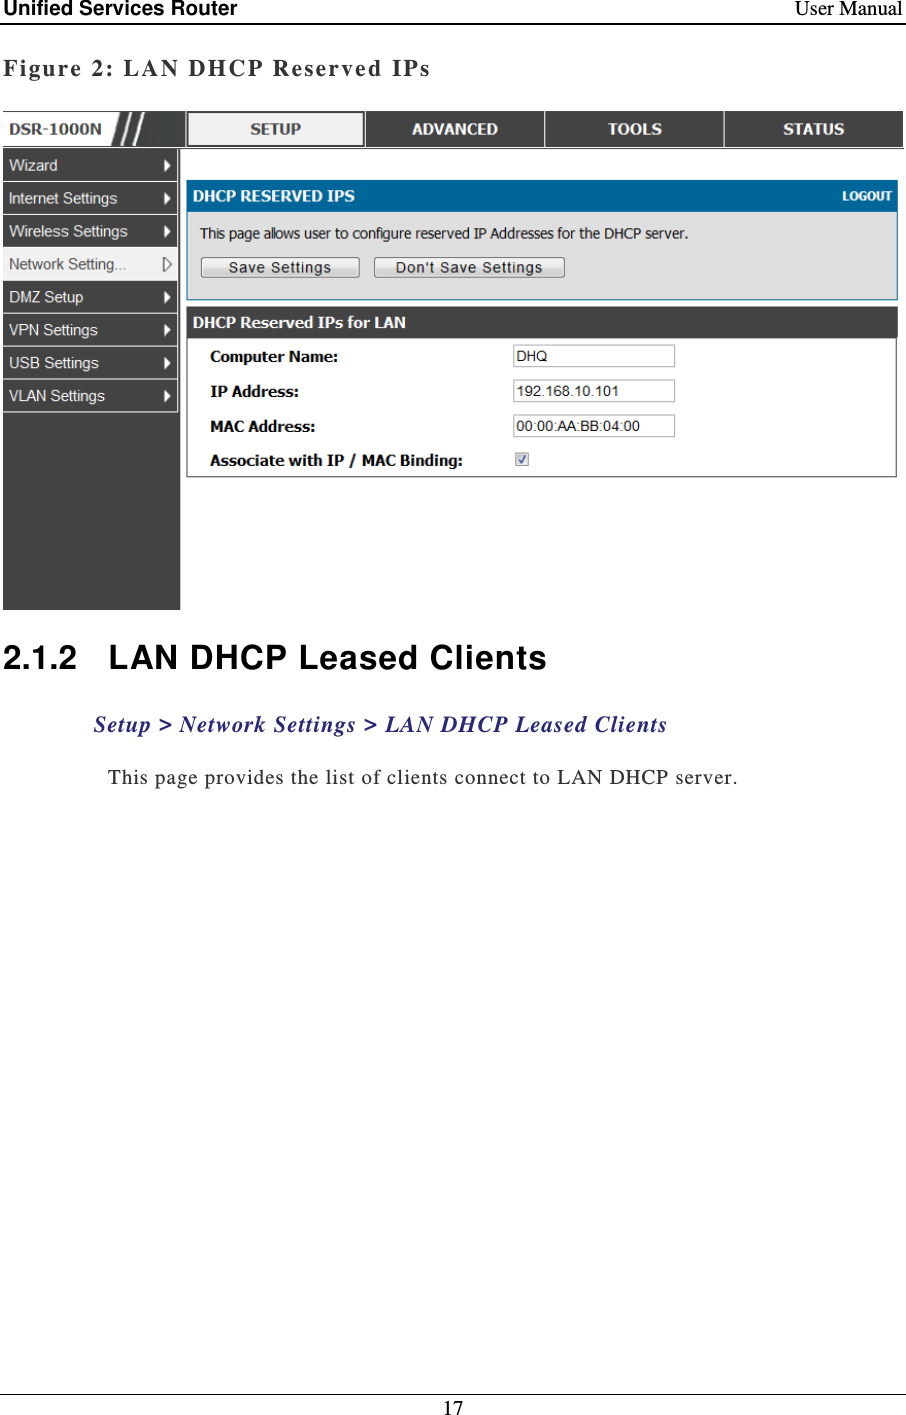 Unified Services Router    User Manual 17  Figure 2: LAN DHCP Reserved IPs   2.1.2  LAN DHCP Leased Clients Setup &gt; Network Settings &gt; LAN DHCP Leased Clients This page provides the list of clients connect to LAN DHCP server.   